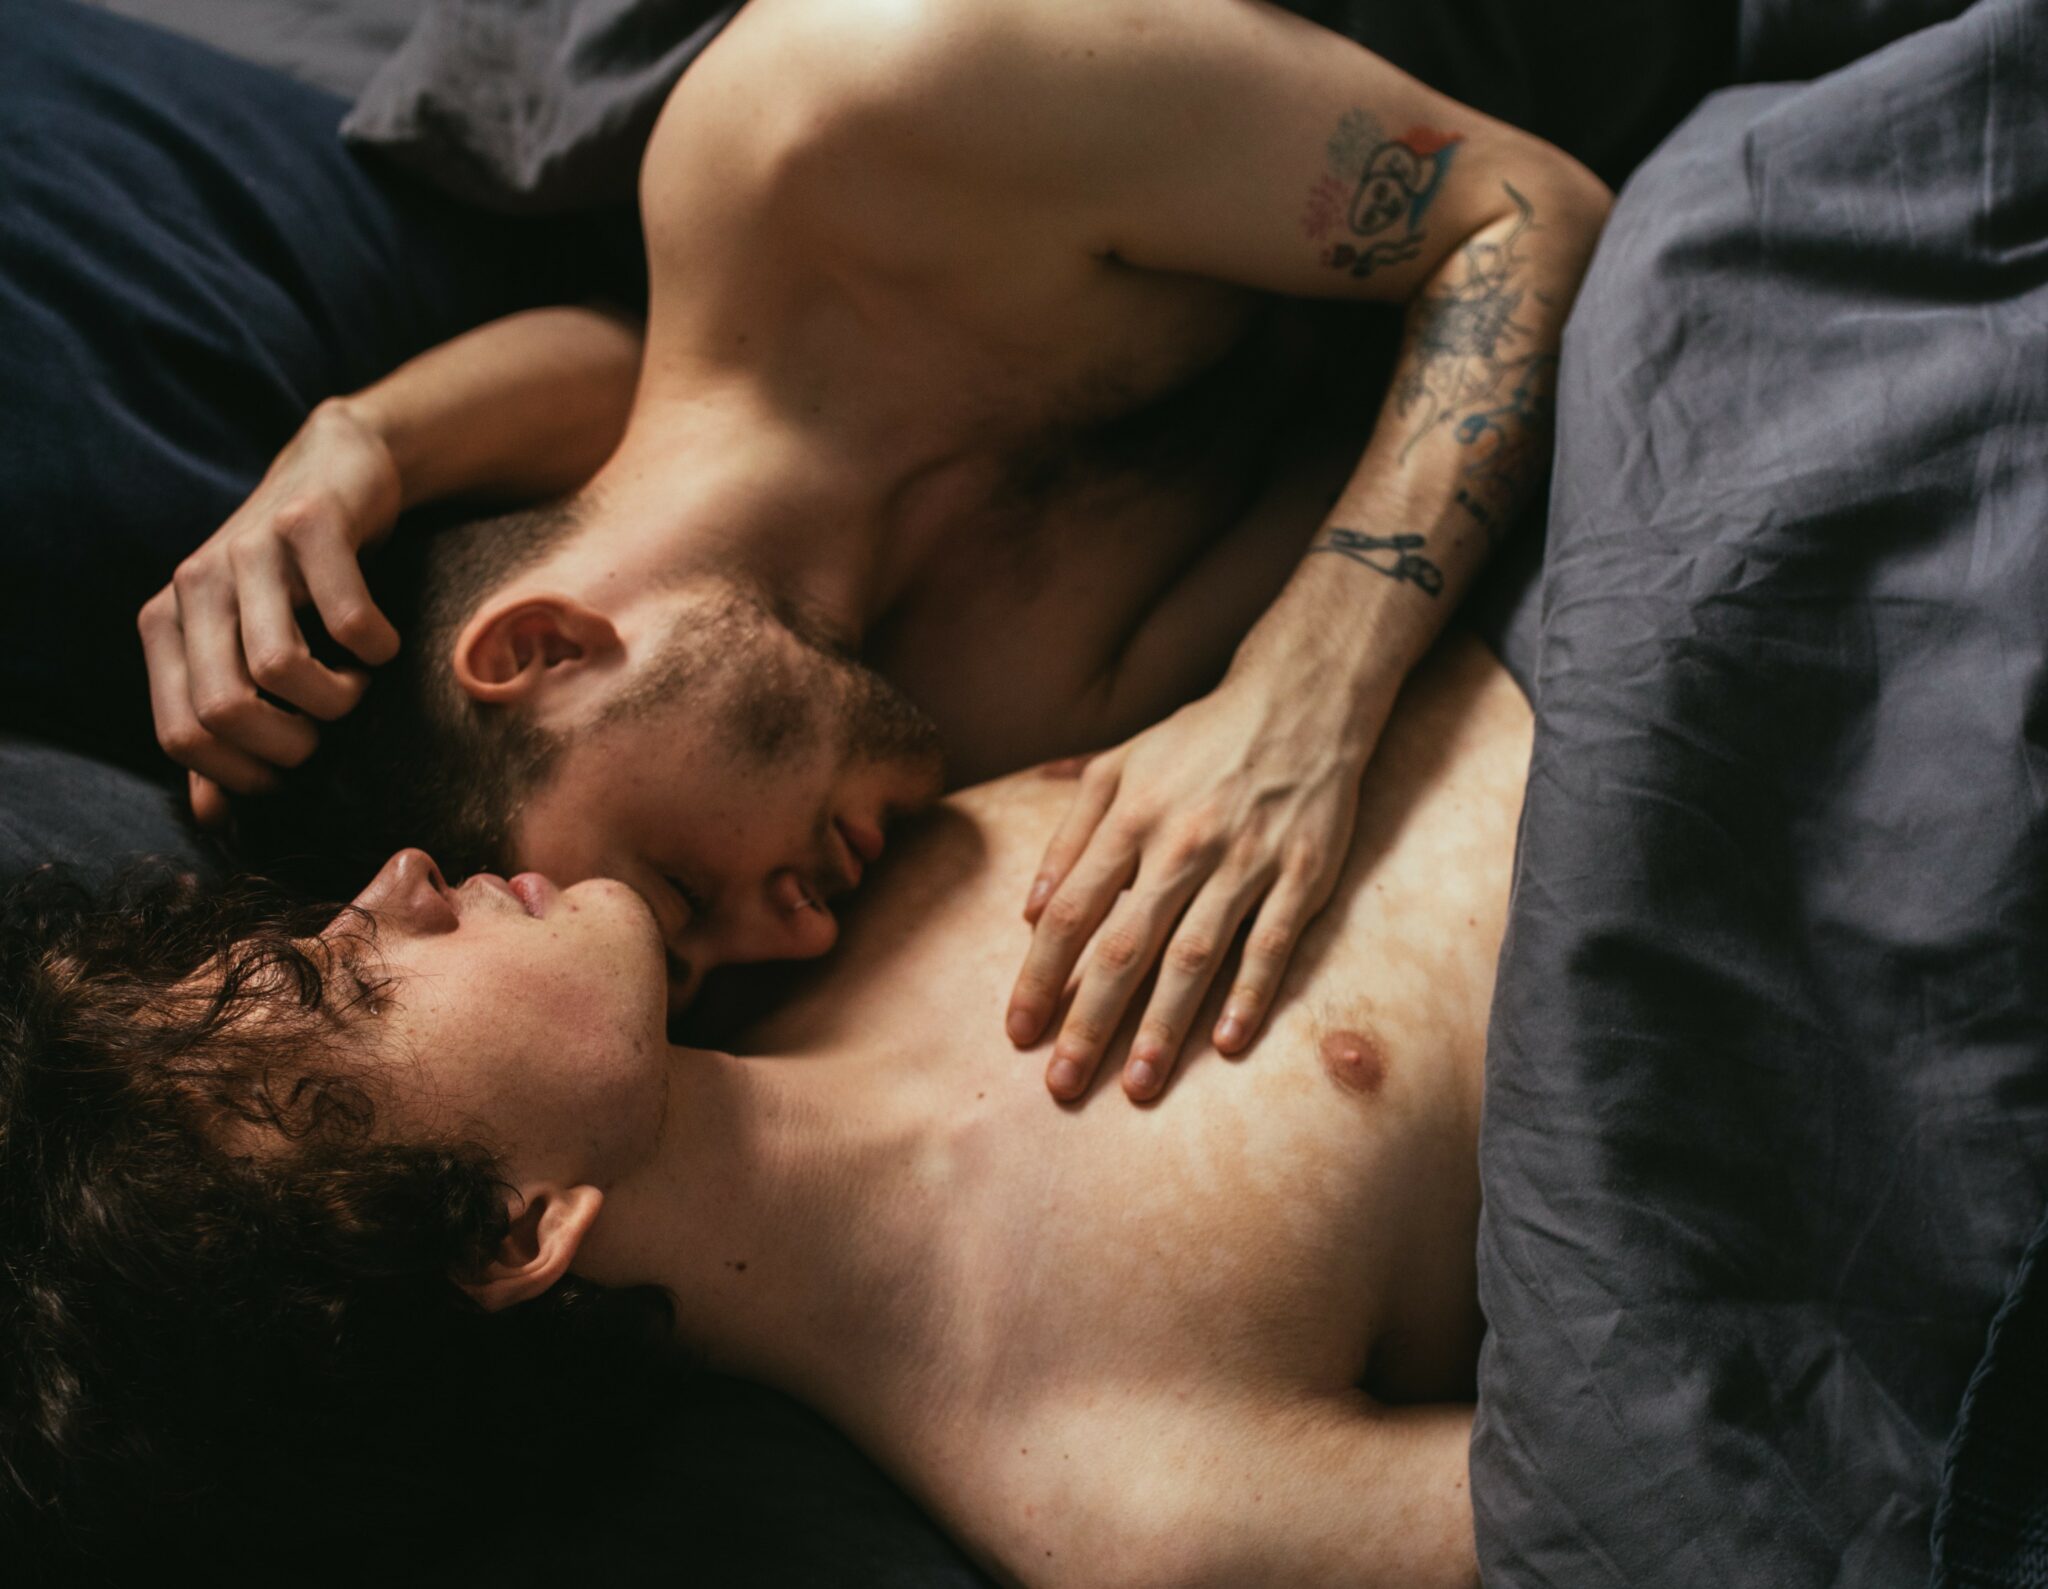 A gay couple cuddling in bed.